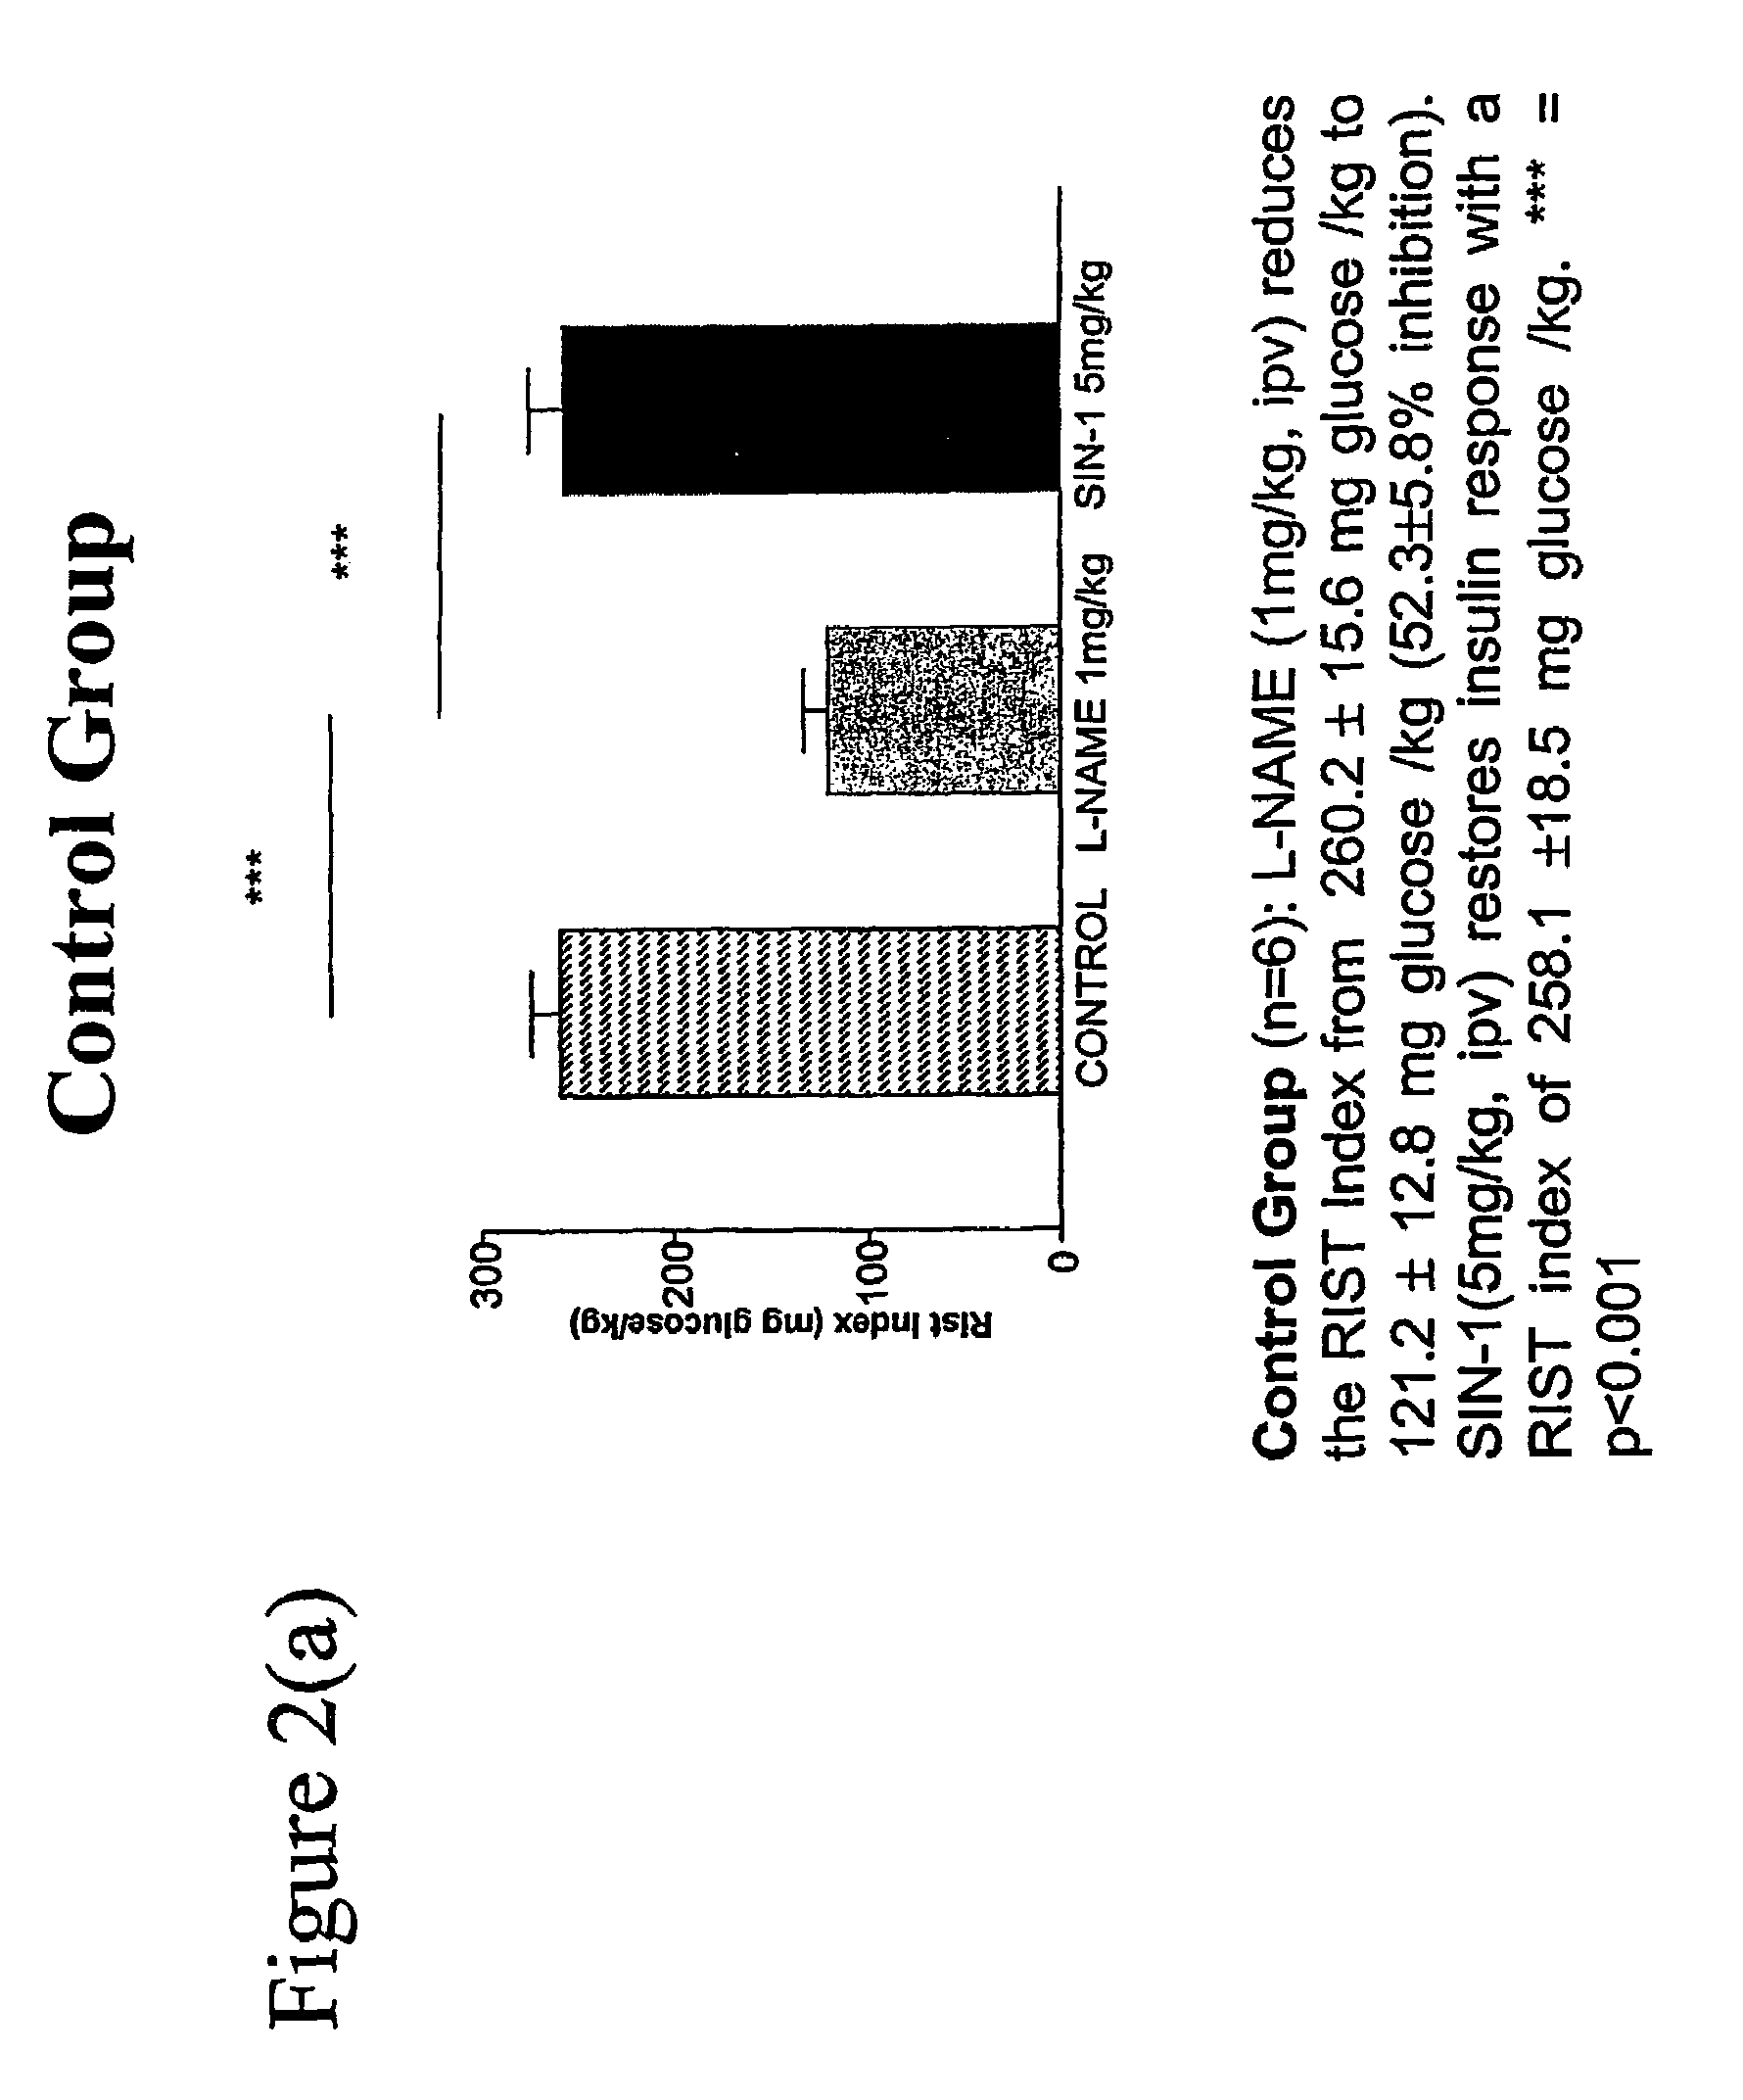 Use of glutathione synthesis stimulating compounds in reducing insulin resistance